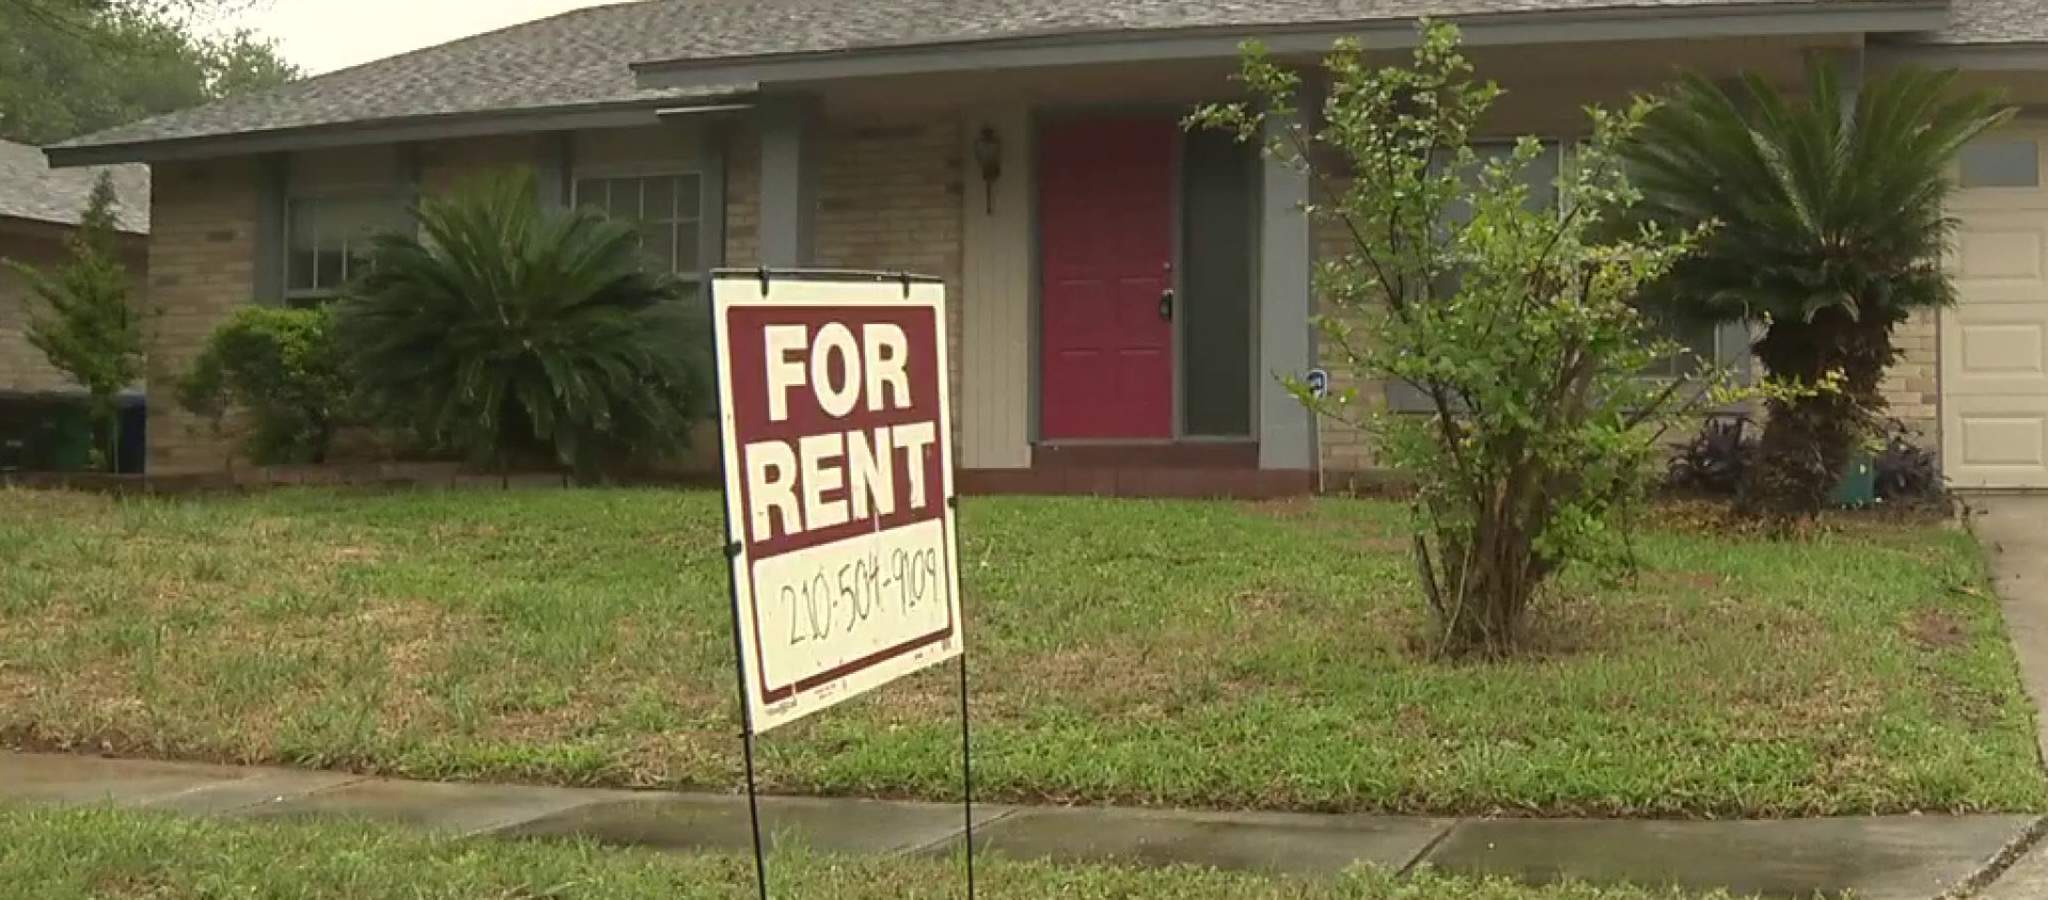 Rent growth in San Antonio’s pricey neighborhoods slows due to pandemic, Zillow says